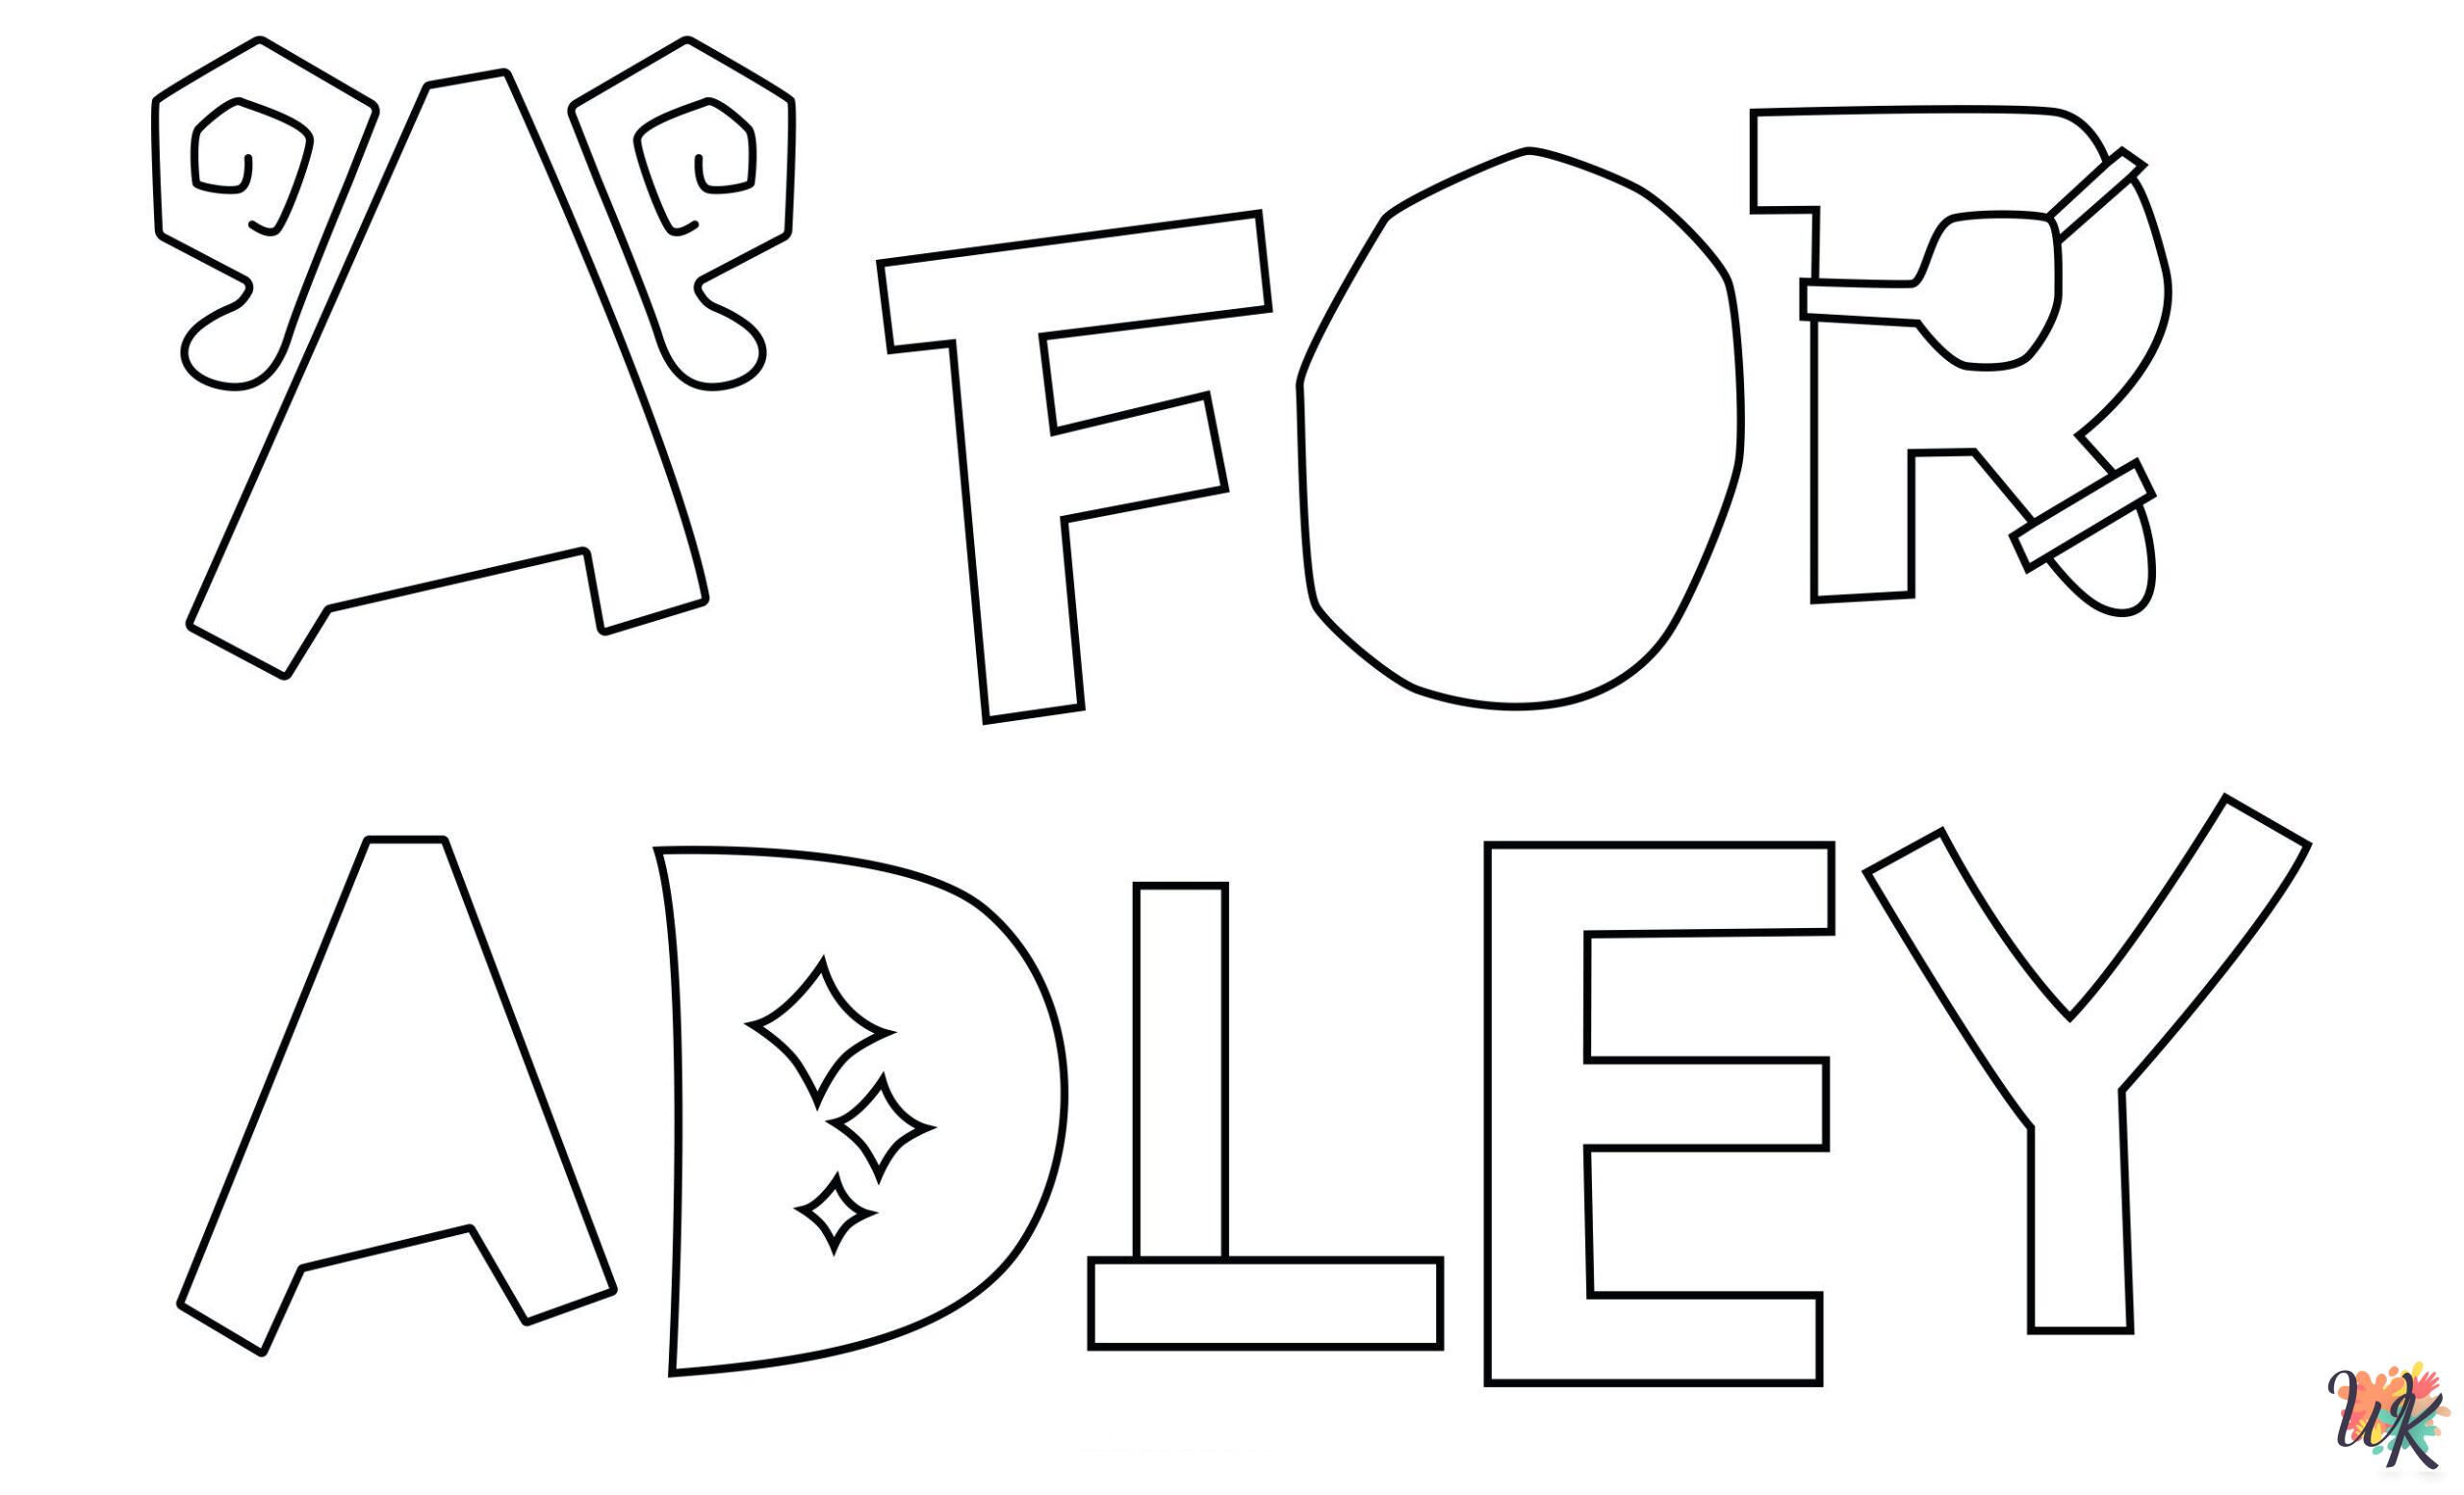 A For Adley printable coloring pages